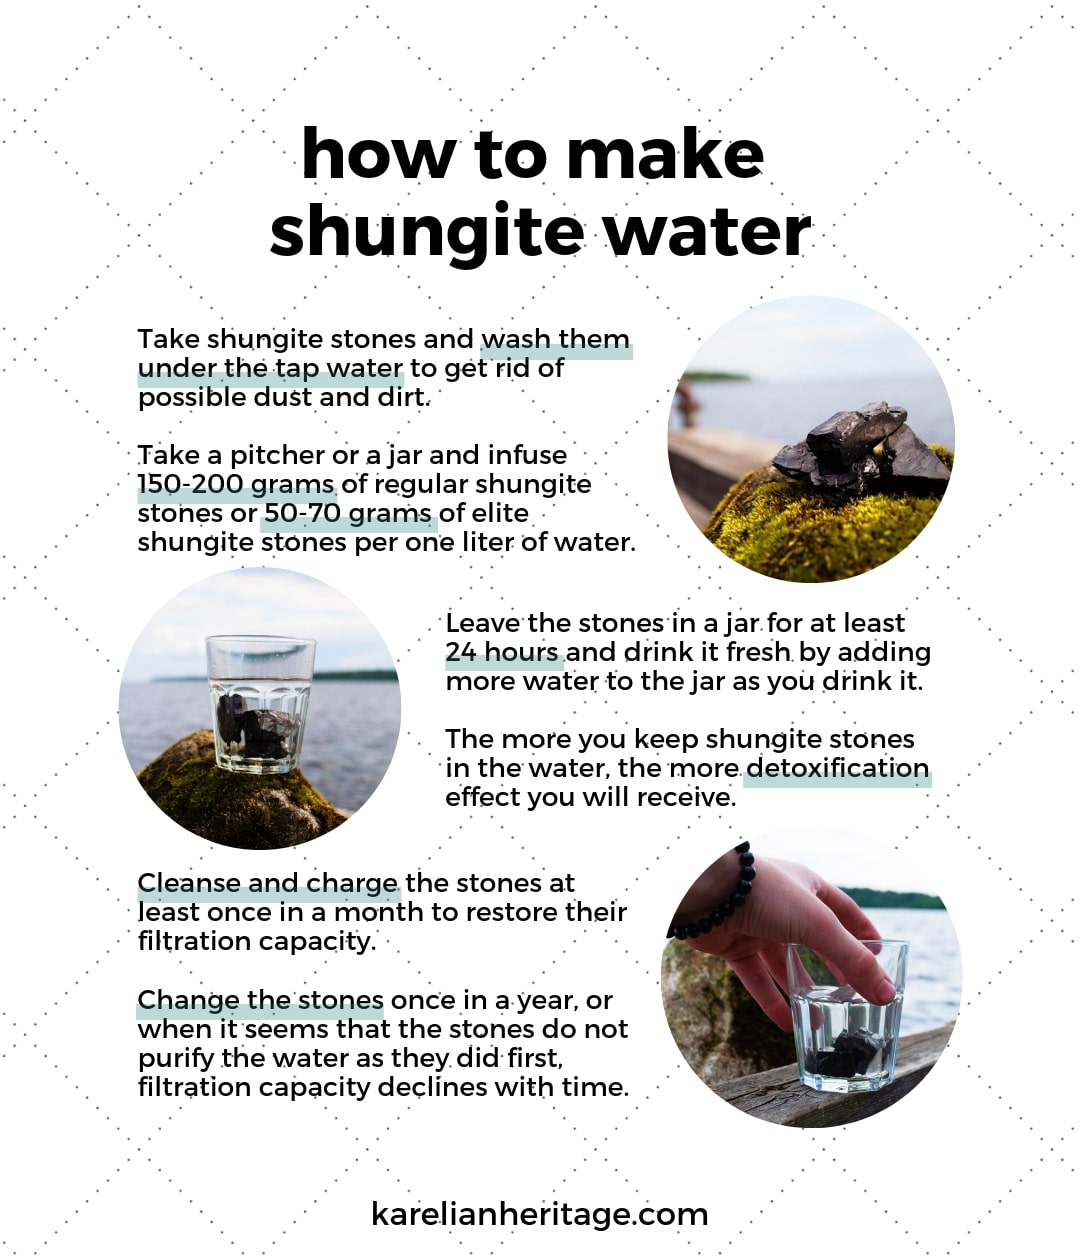 shungite-water-for-food